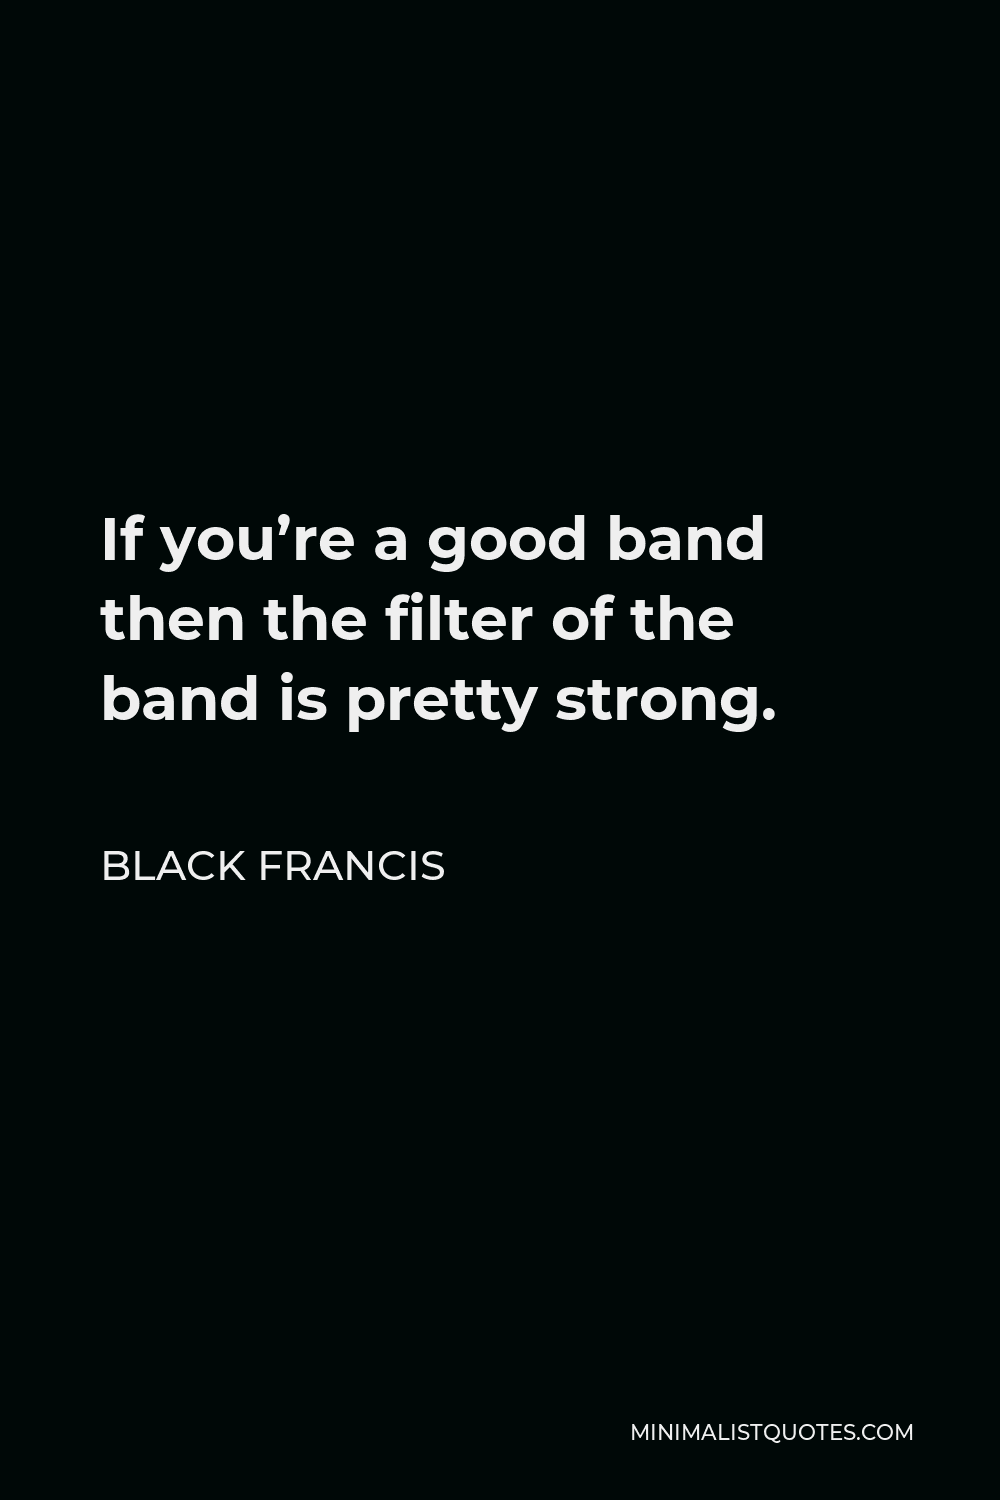 Black Francis Quote - If you’re a good band then the filter of the band is pretty strong.